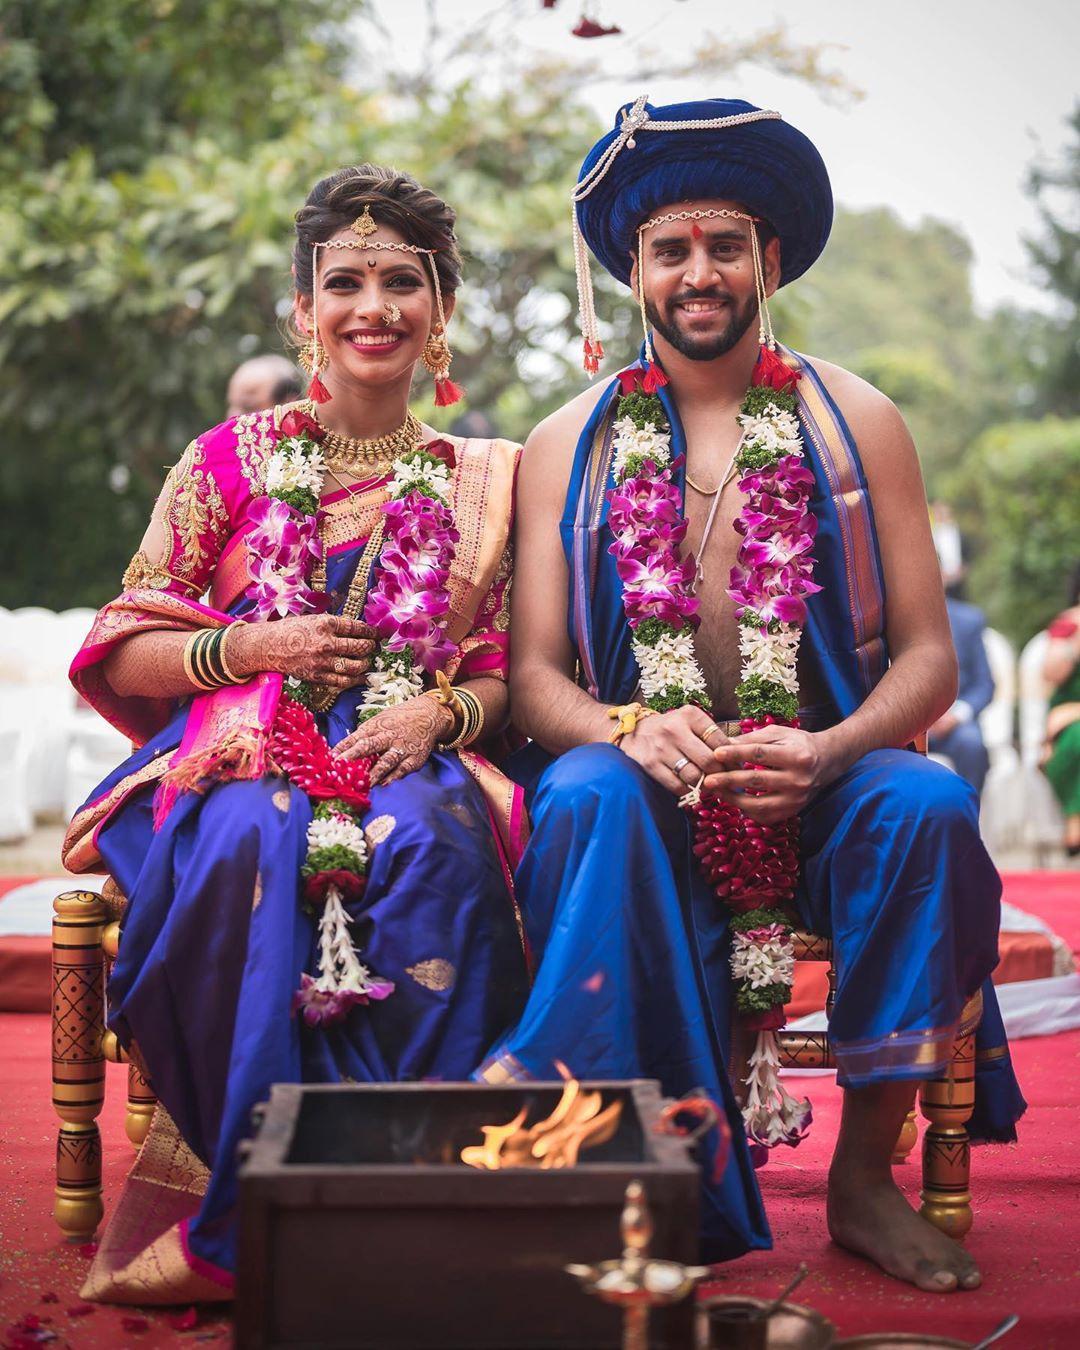 A Traditional Maharashtrian Wedding With A Touch Of Elegant Royalty |  Wedding outfits for groom, Couple wedding dress, Wedding matching outfits